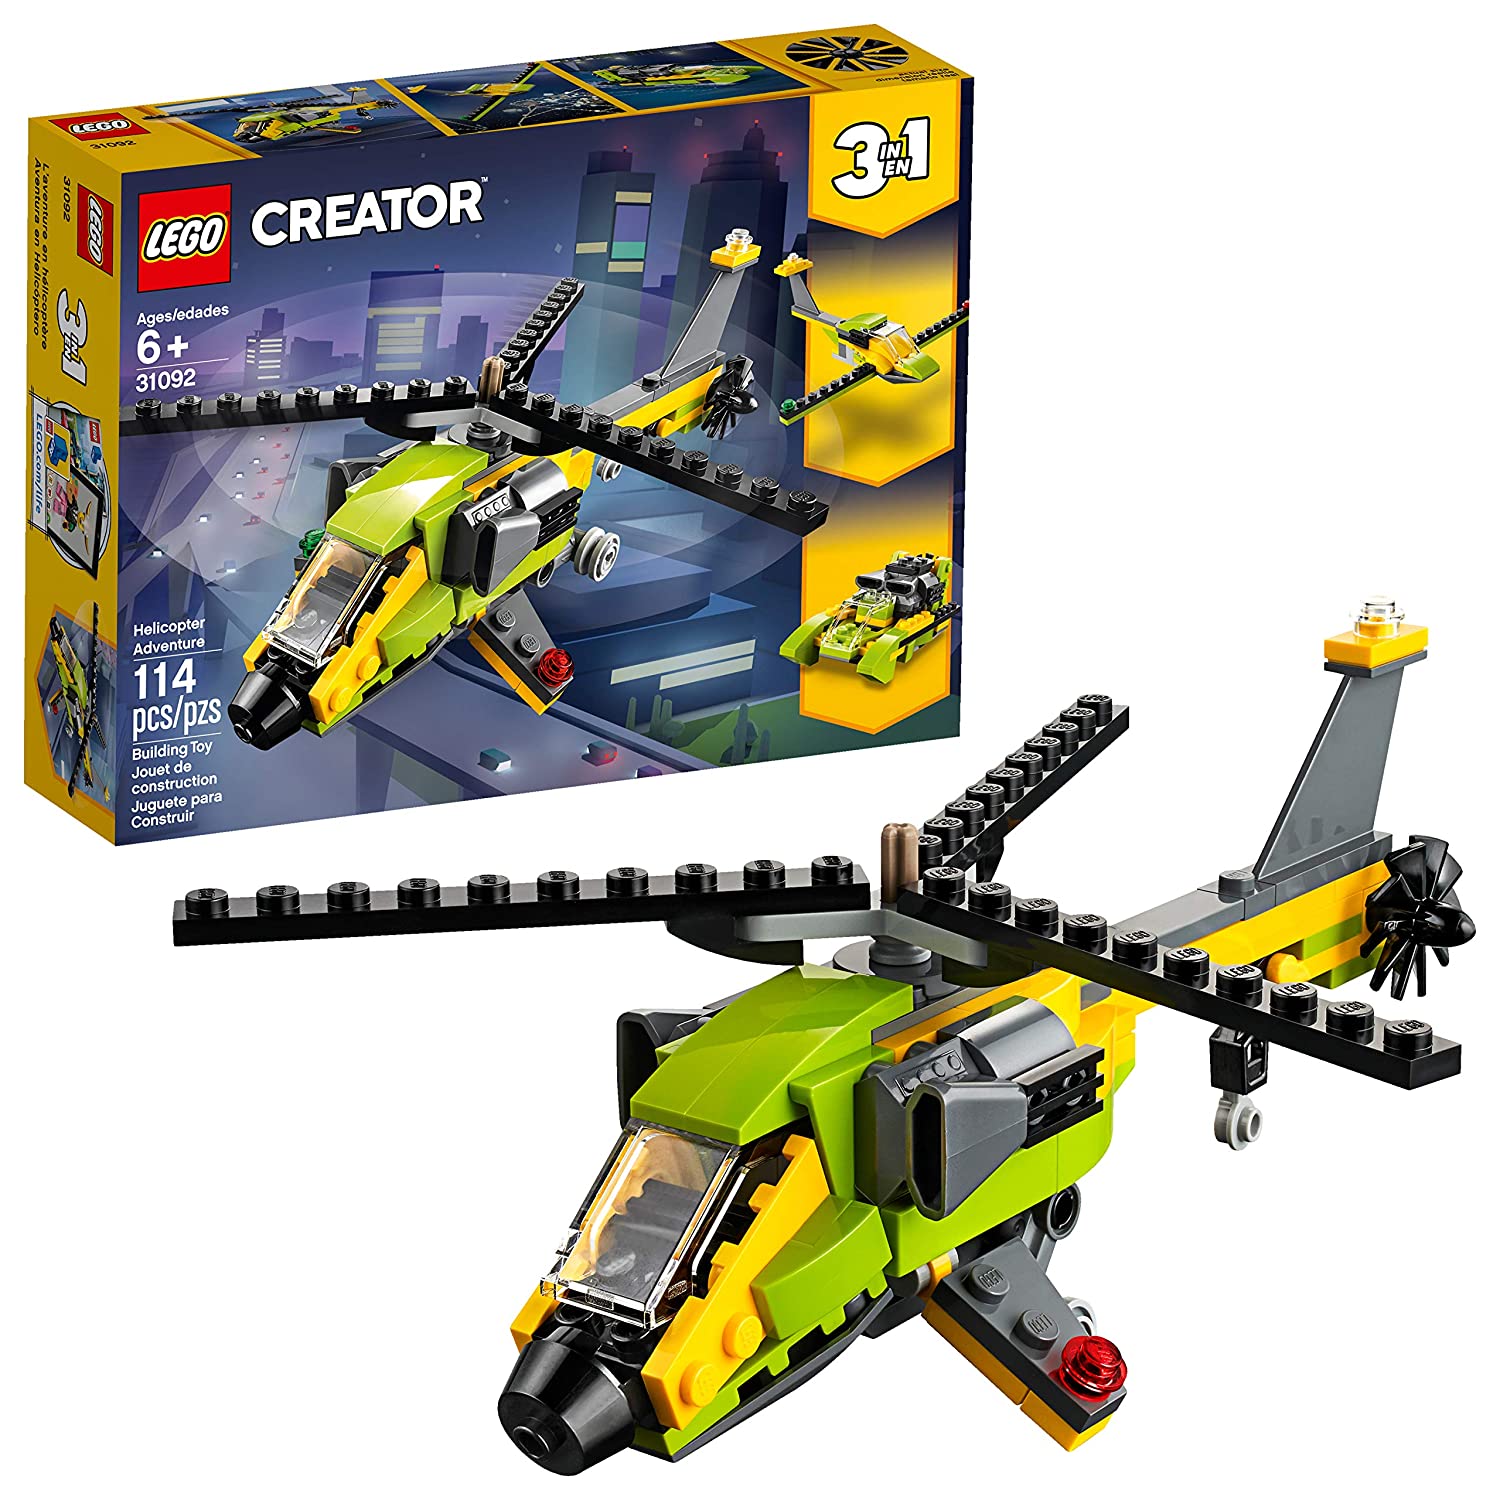 Top 9 Best LEGO Helicopter Sets Reviews in 2022 1